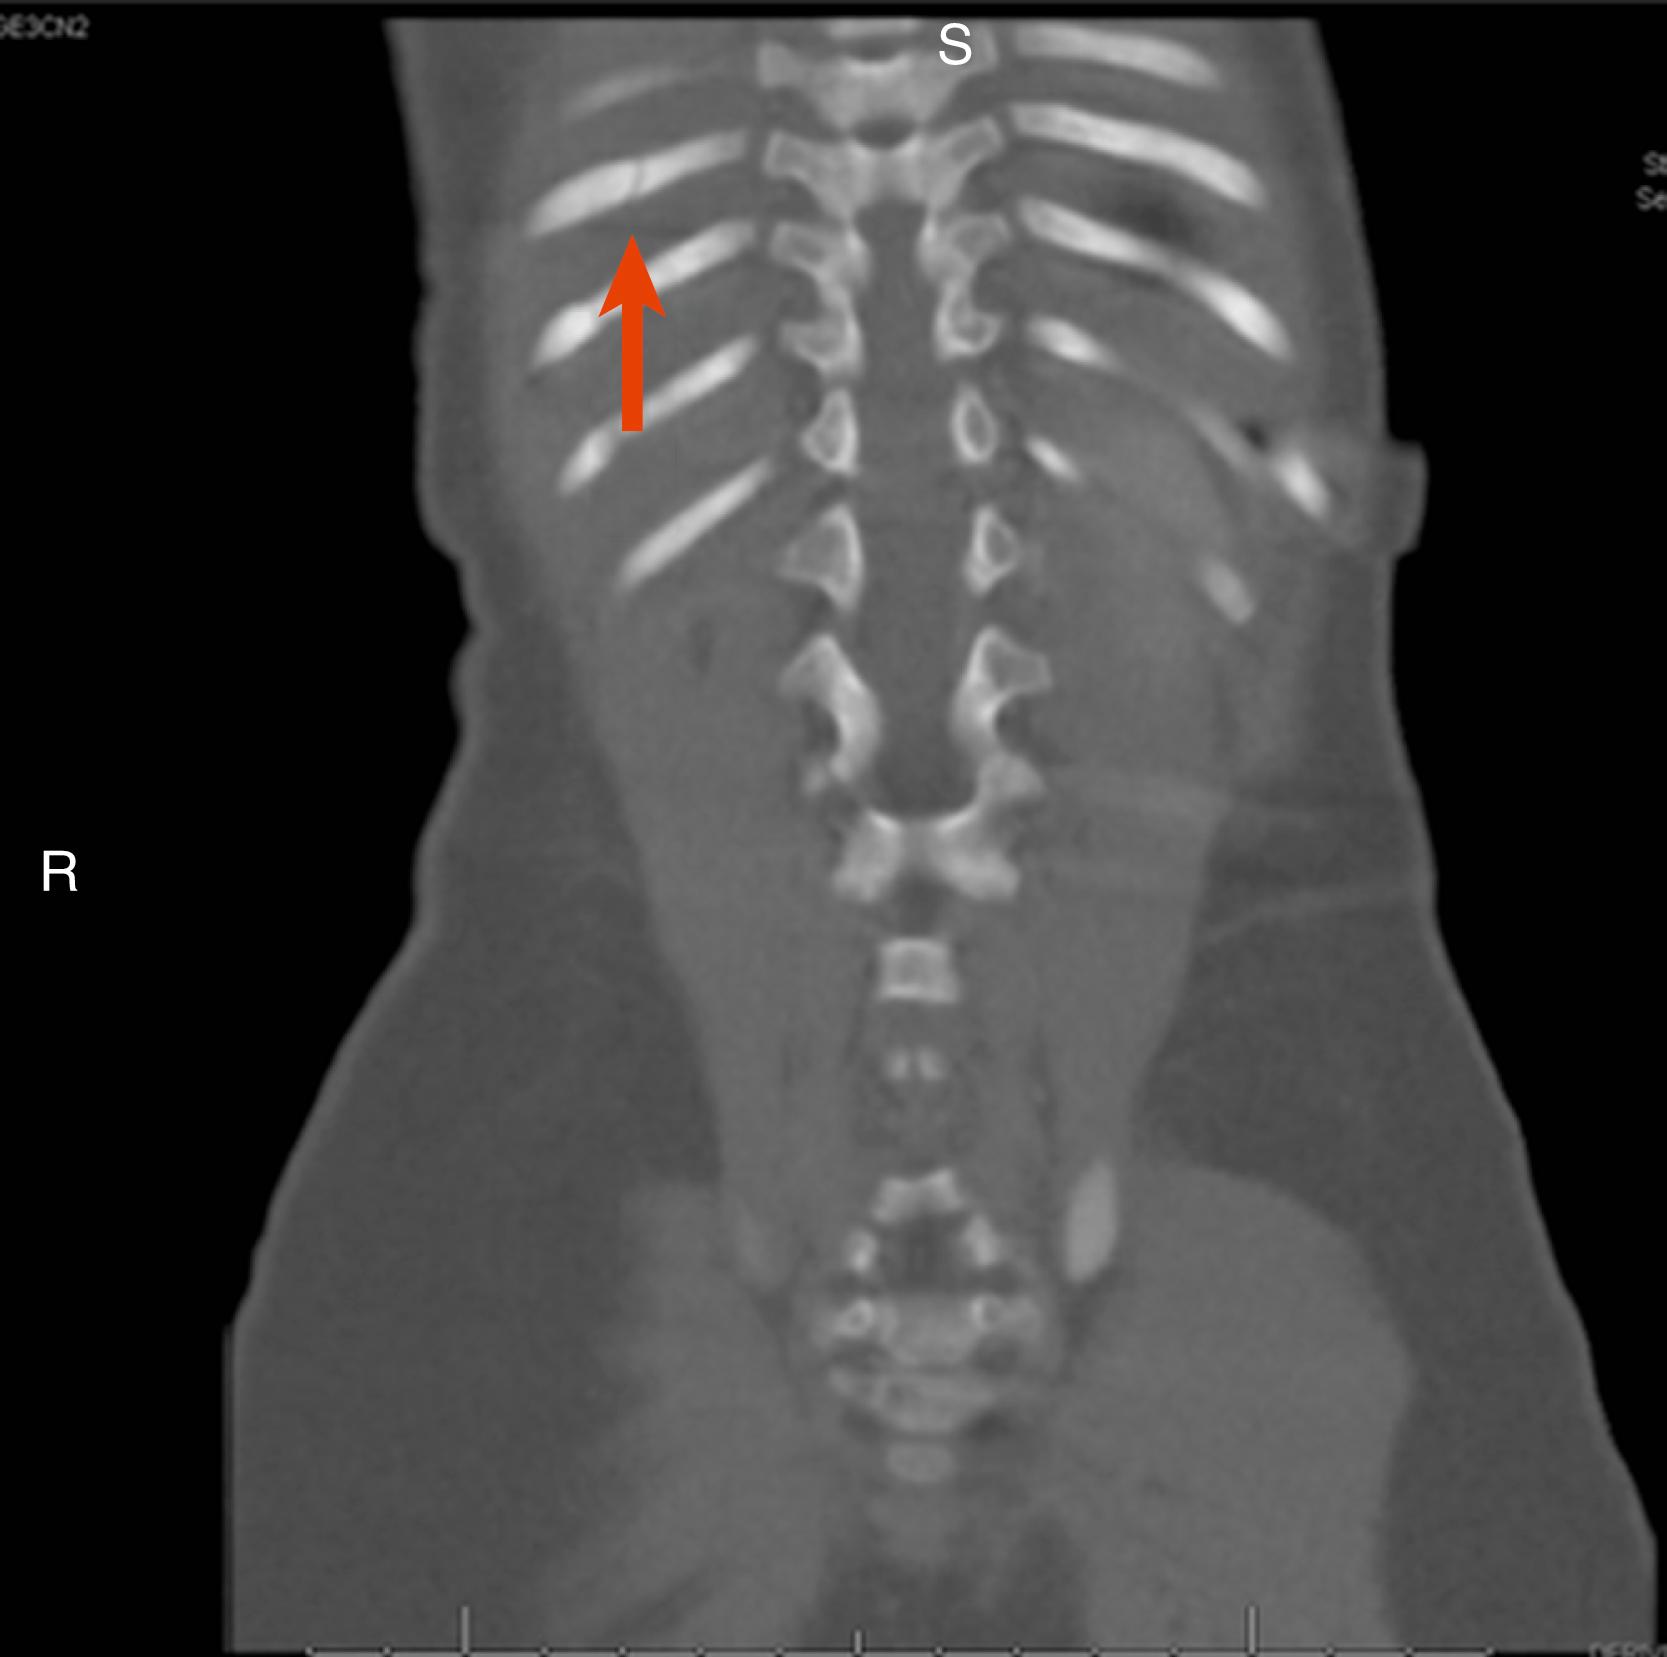 Fig. 6.25, 8-month-old infant with an unexplained parietal skull fracture was noted to have elevated liver function tests (LFTs), which prompted an abdominal CT that revealed this acute 9th posterior rib fracture (see red arrow ).